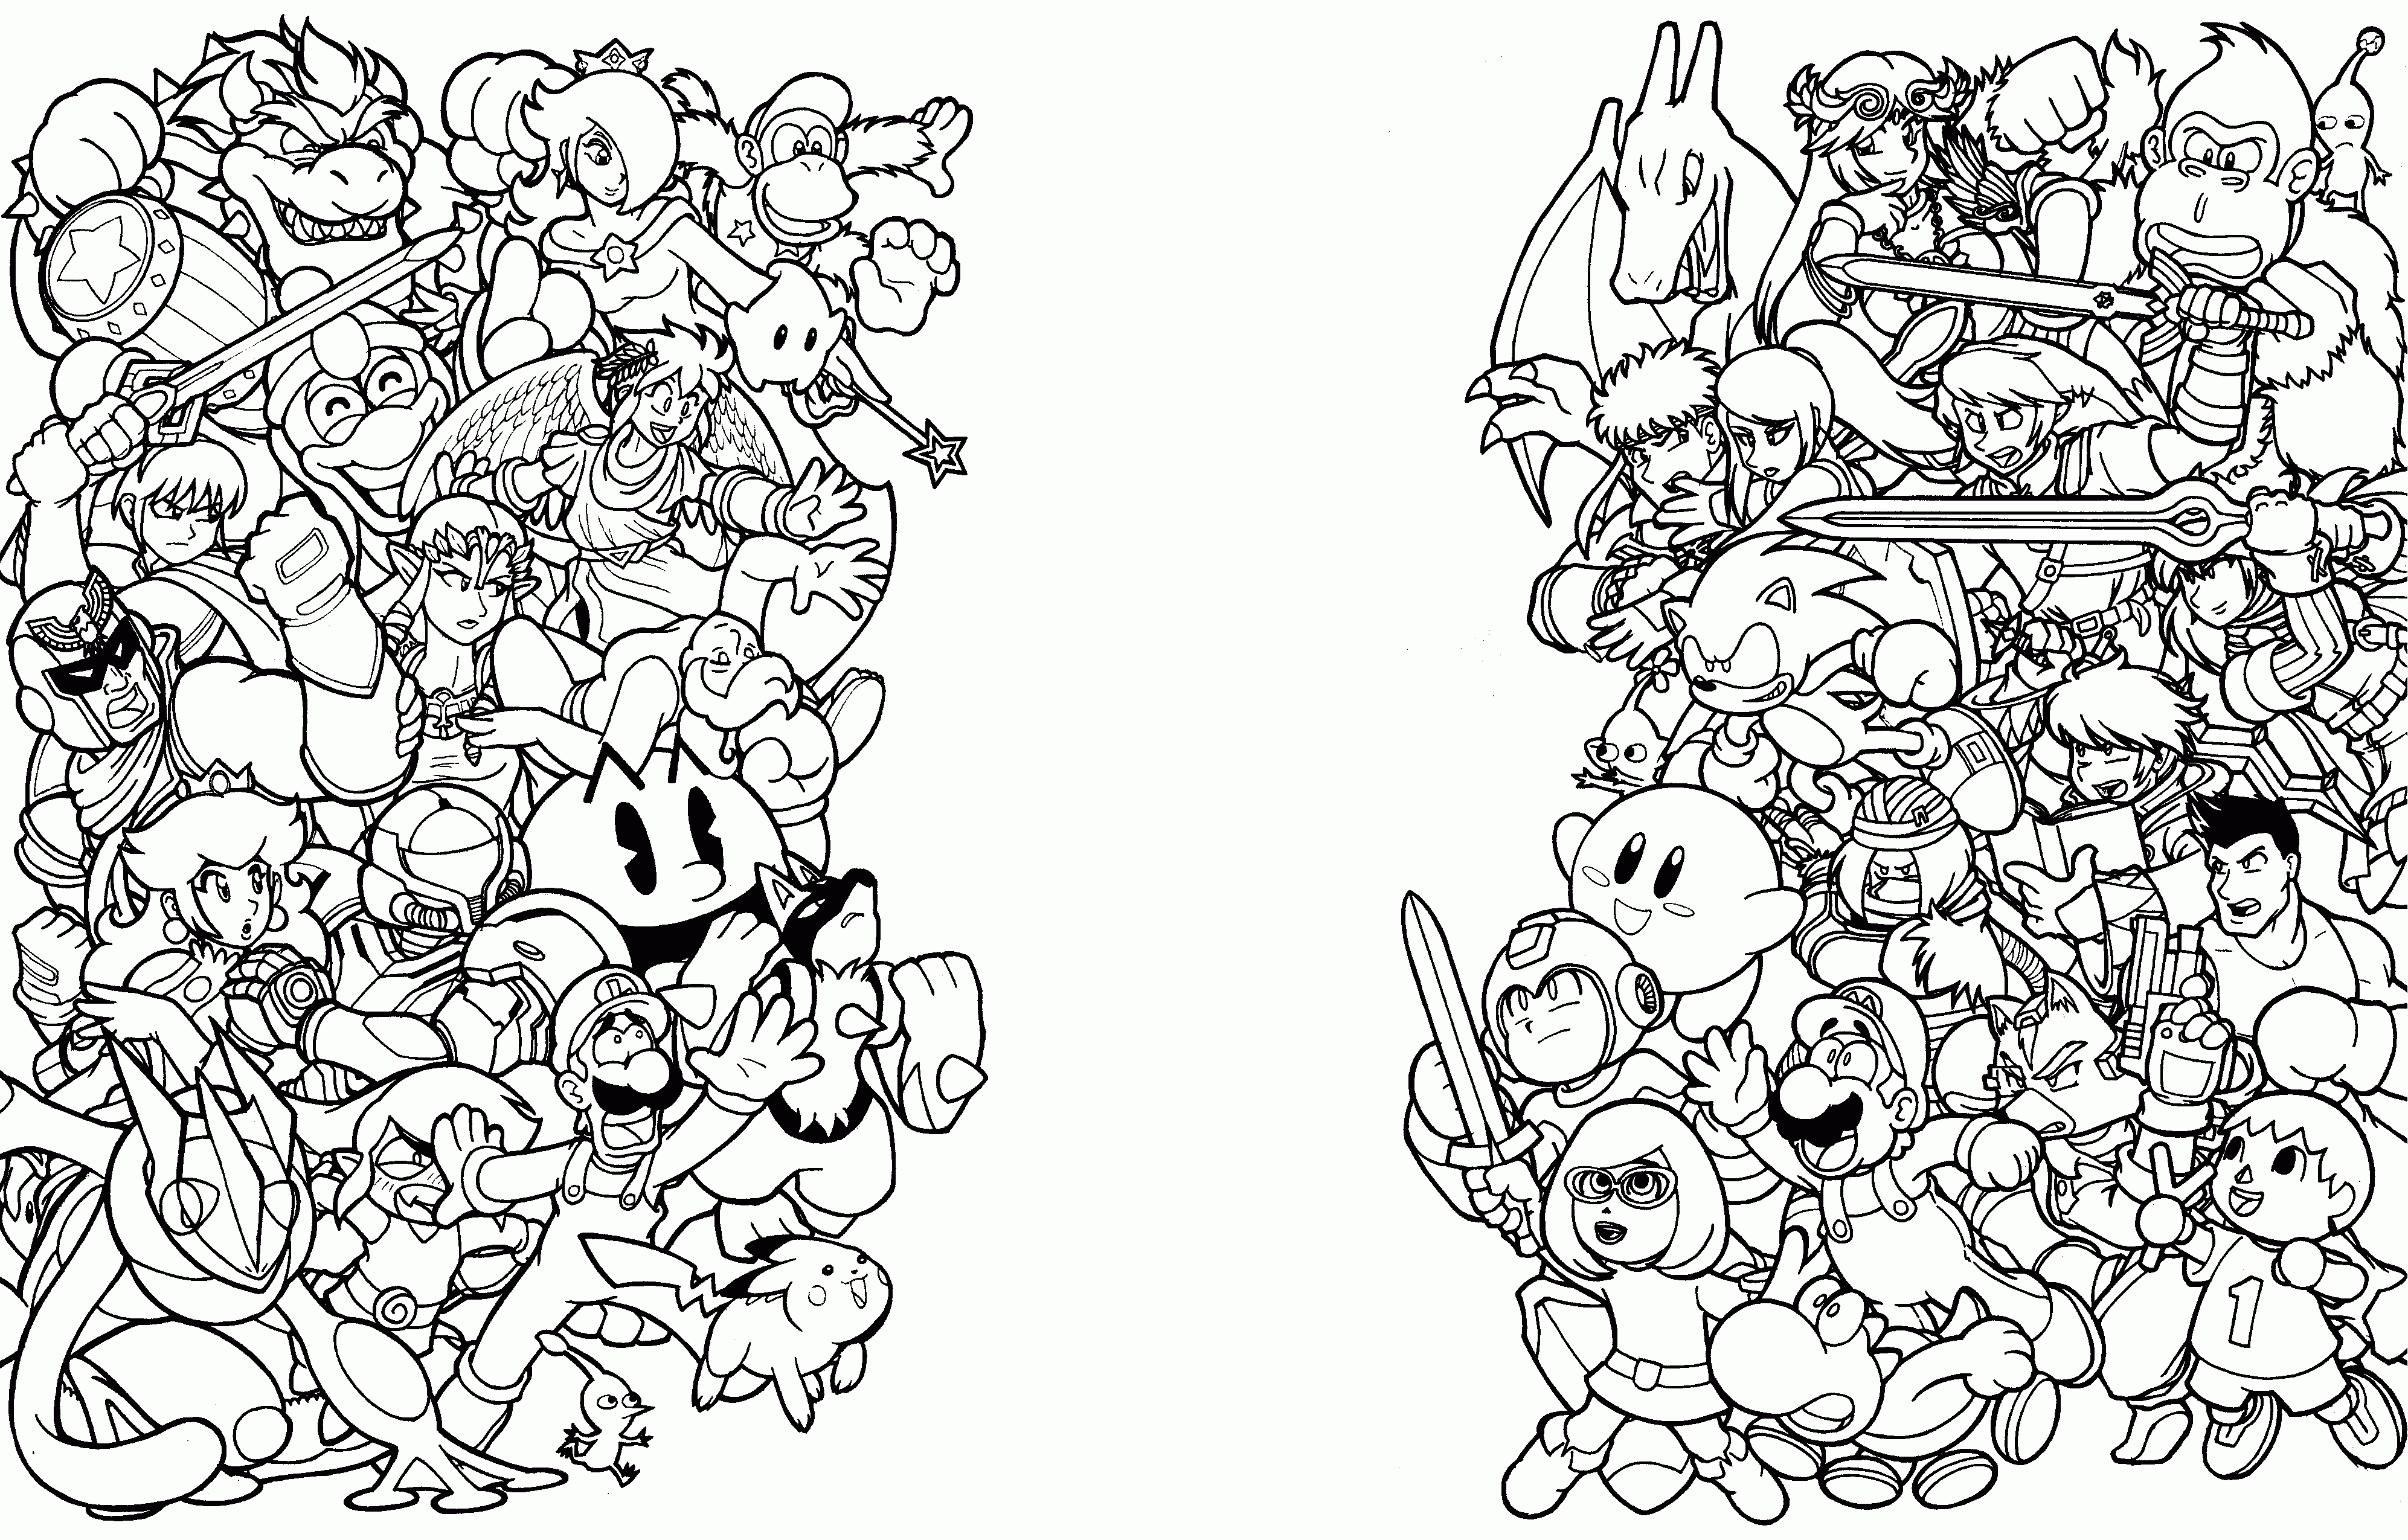 Smash Brothers WIP NIntendo Force by Thormeister on DeviantArt